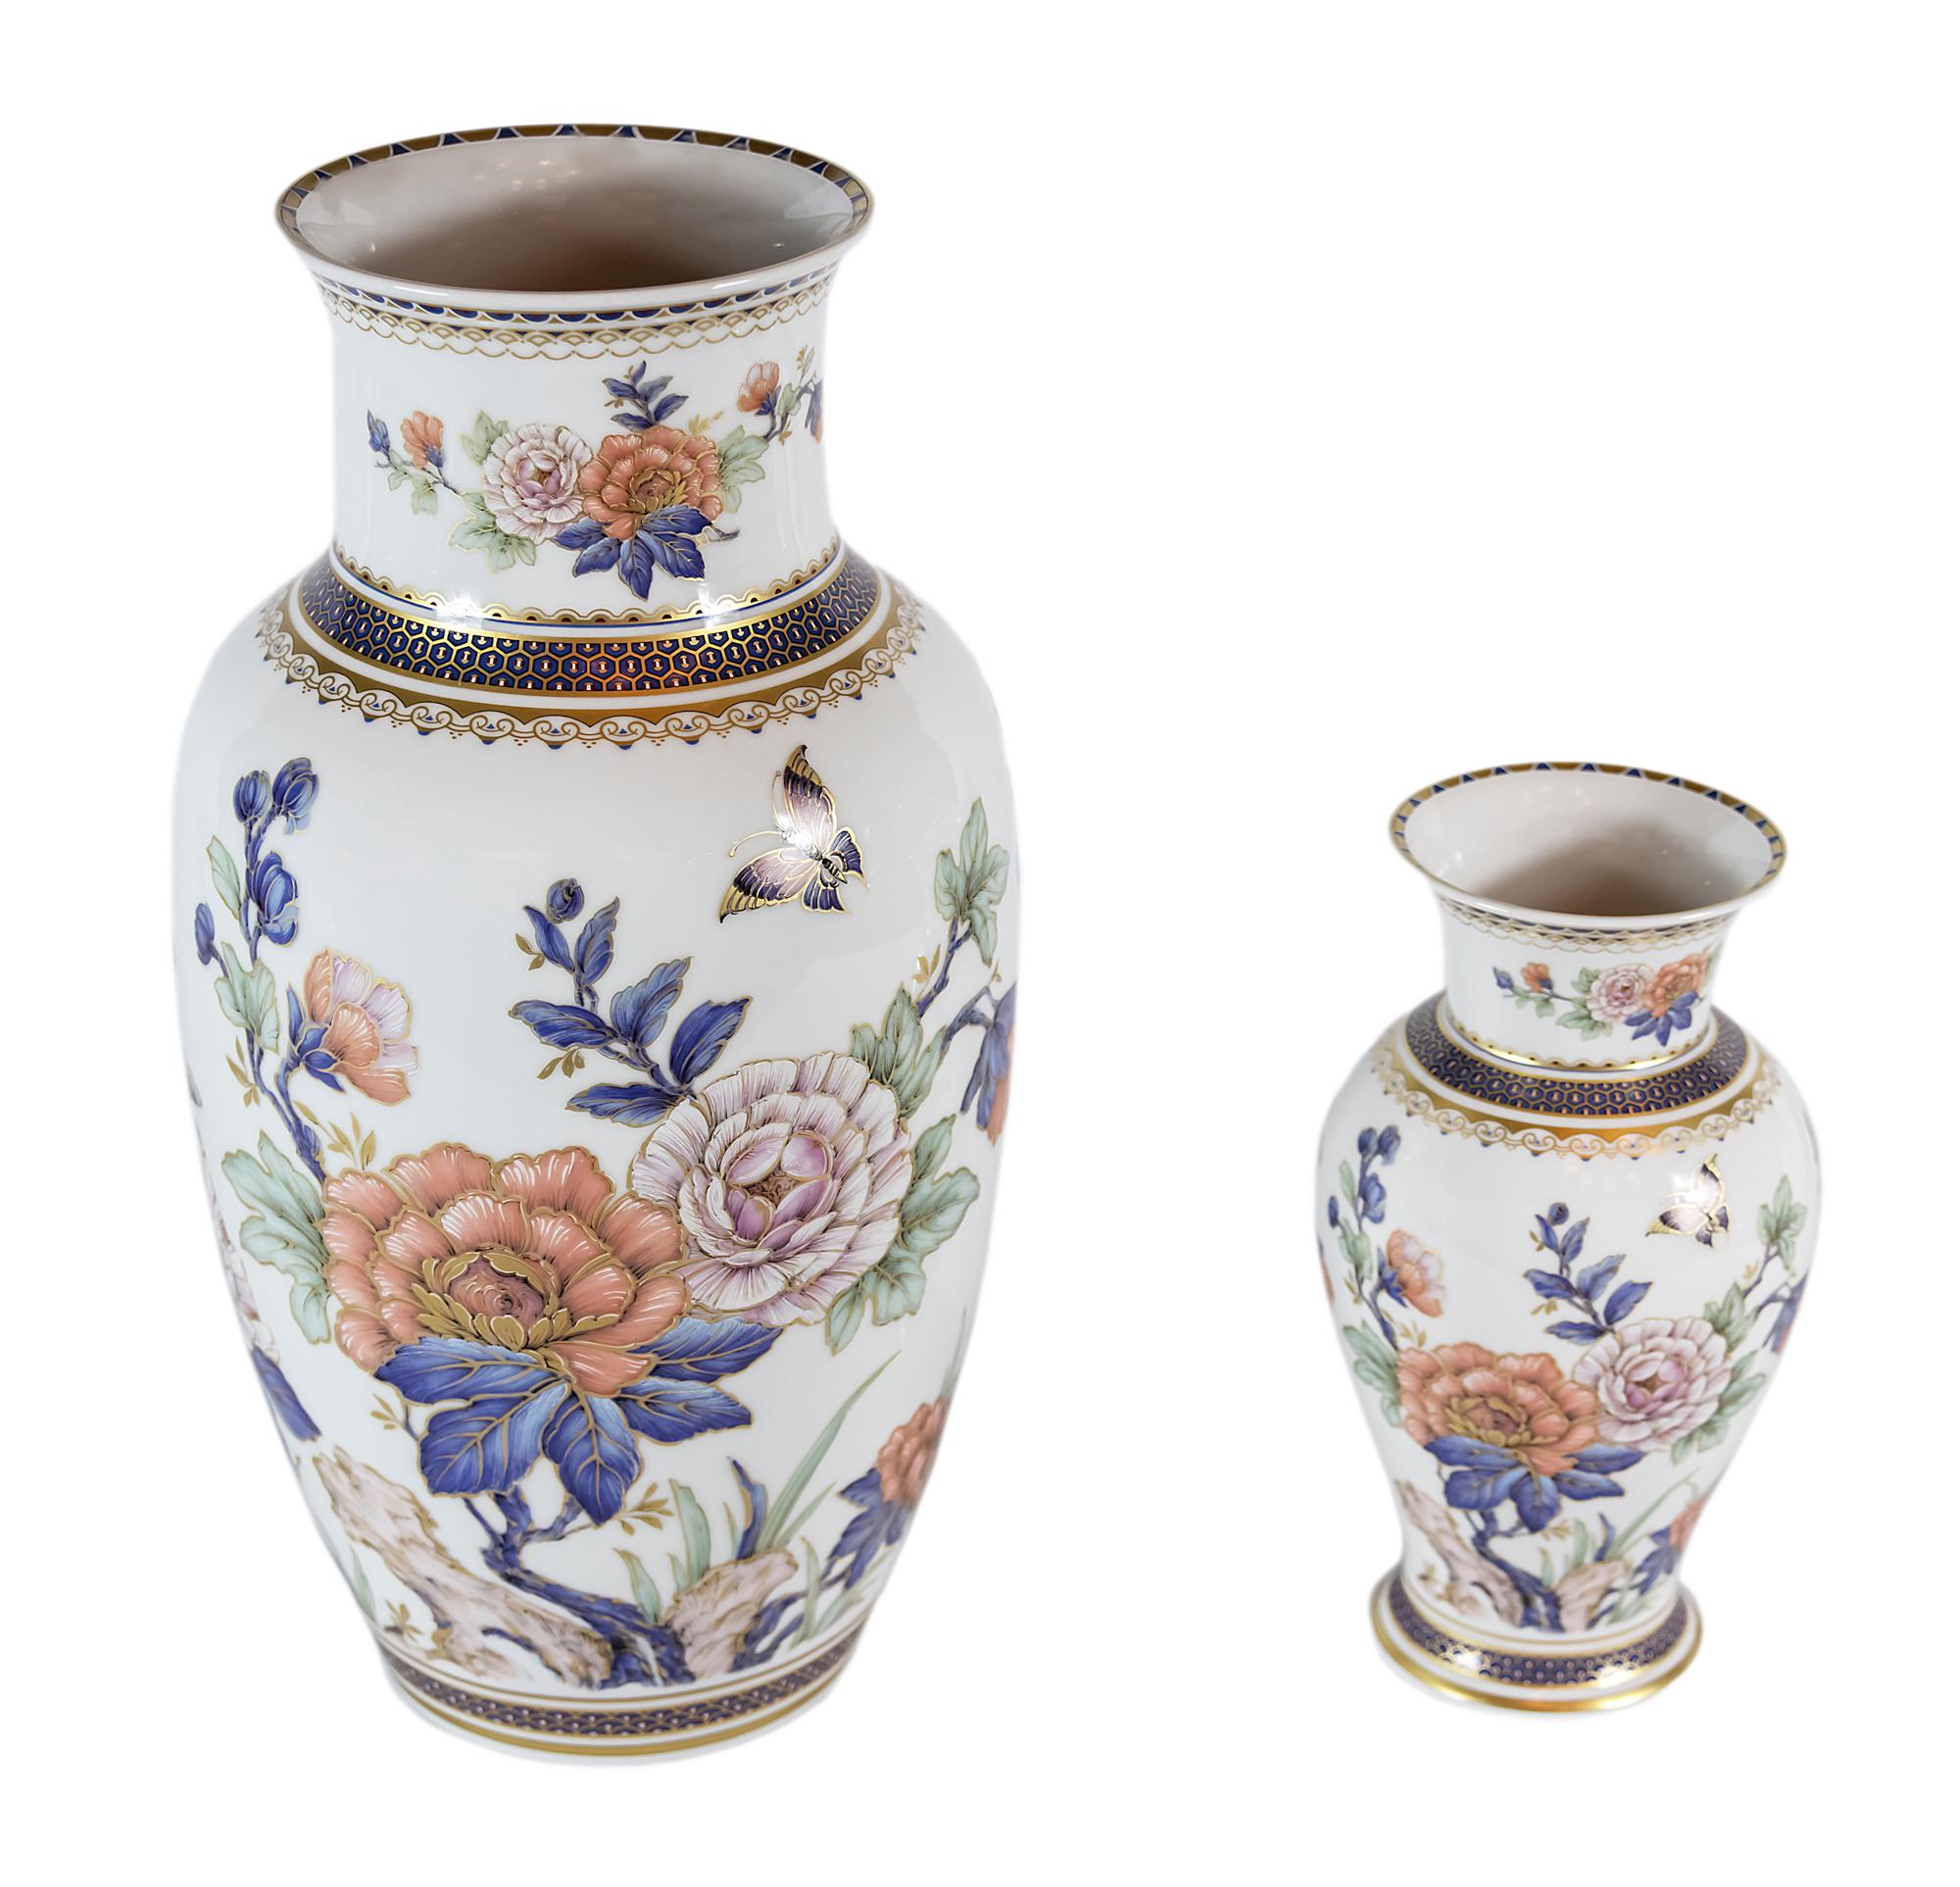 Set of two vases created by Kaiser Porcelain manufactory in 1950s.
Measures: Large vase H 38 cm x 20 cm, small vase H 22 x 13 cm.
Both vases are hand painted with floral decor in the oriental style.

   